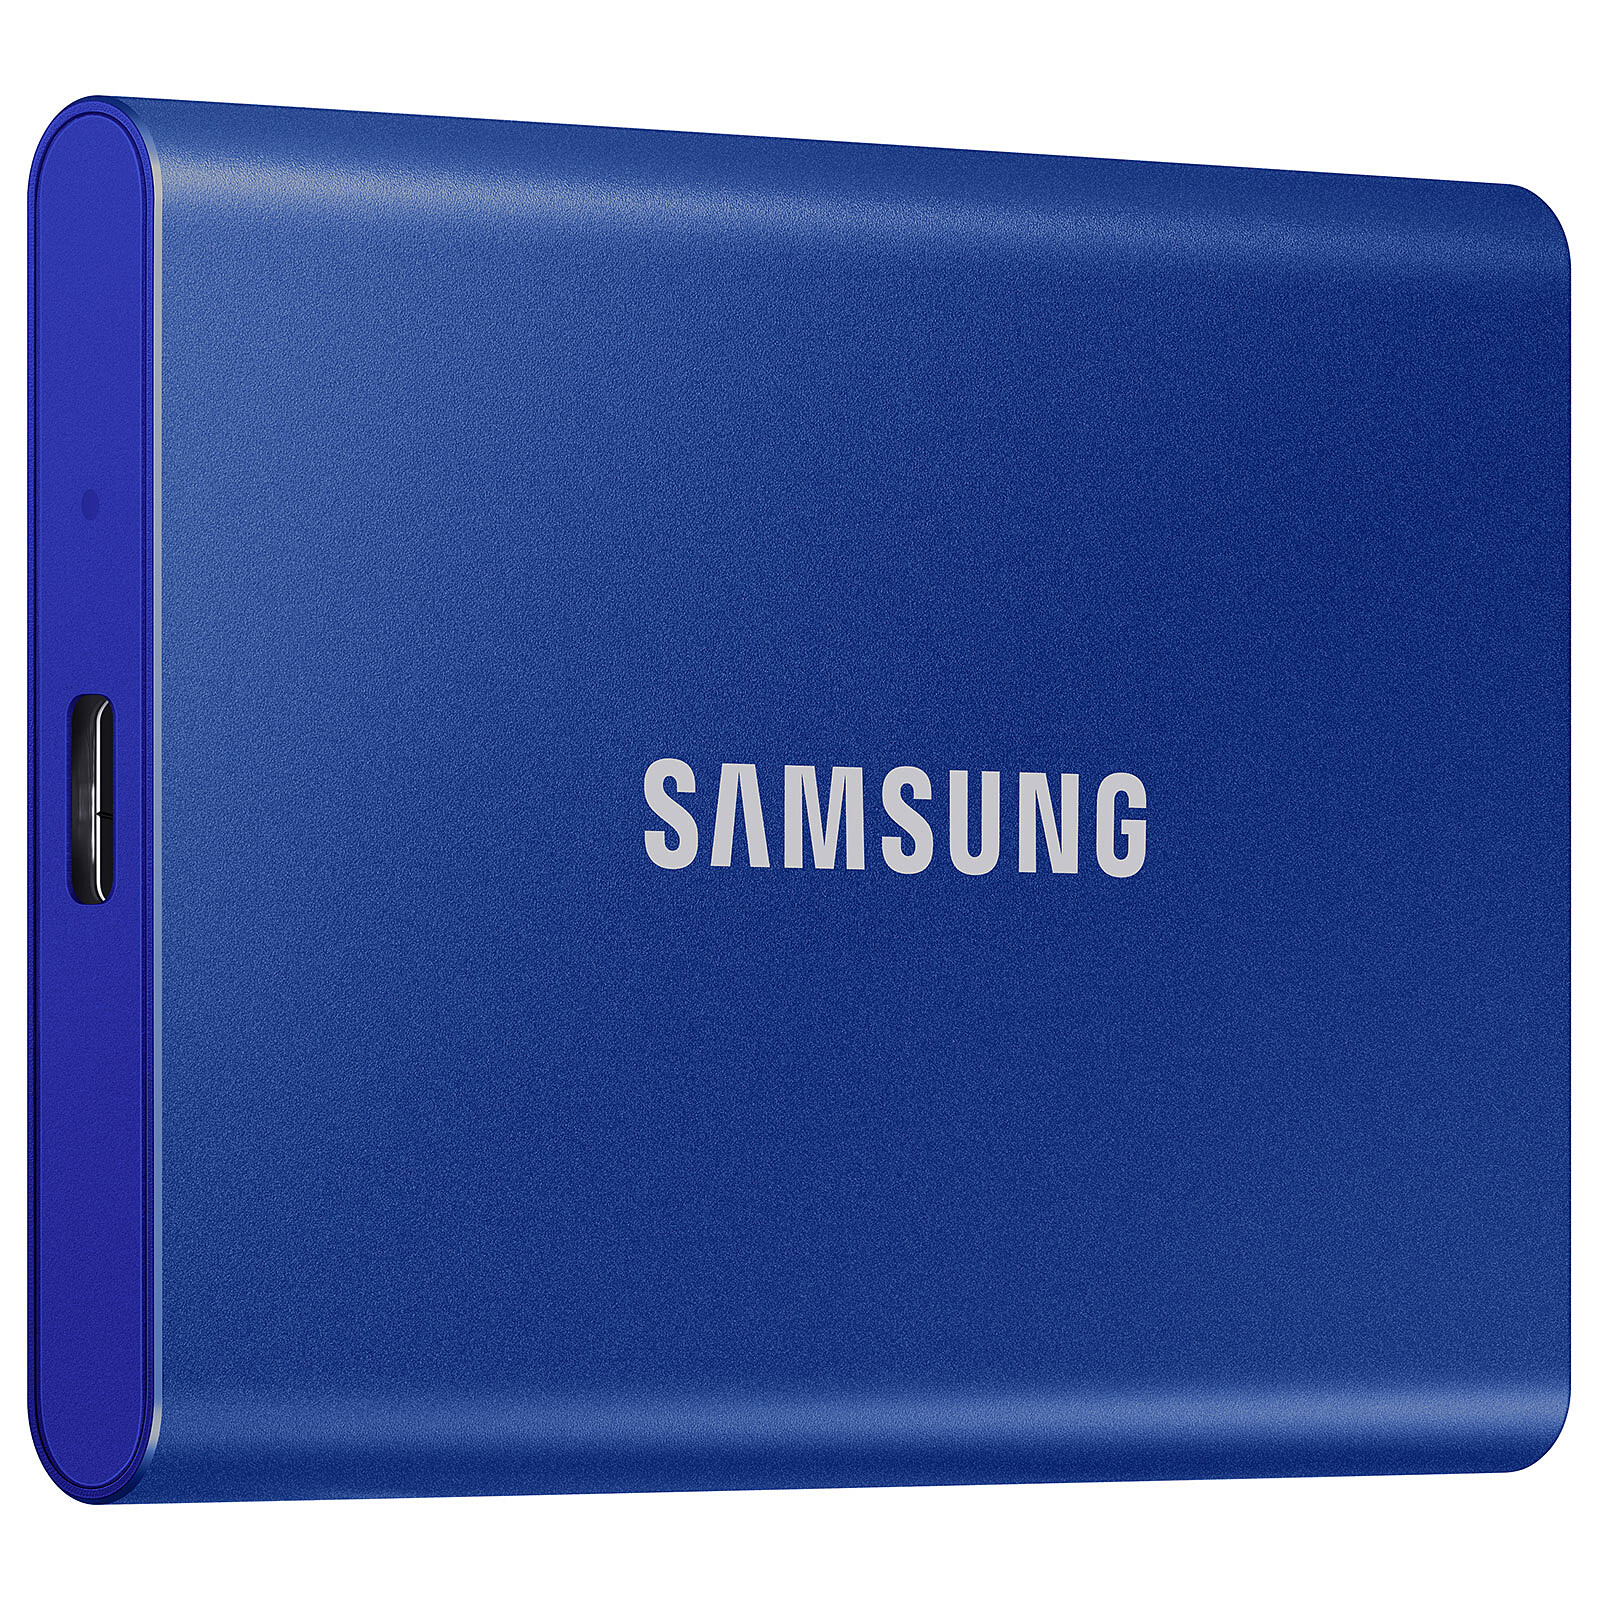 Disque dur externe samsung 2to - Cdiscount